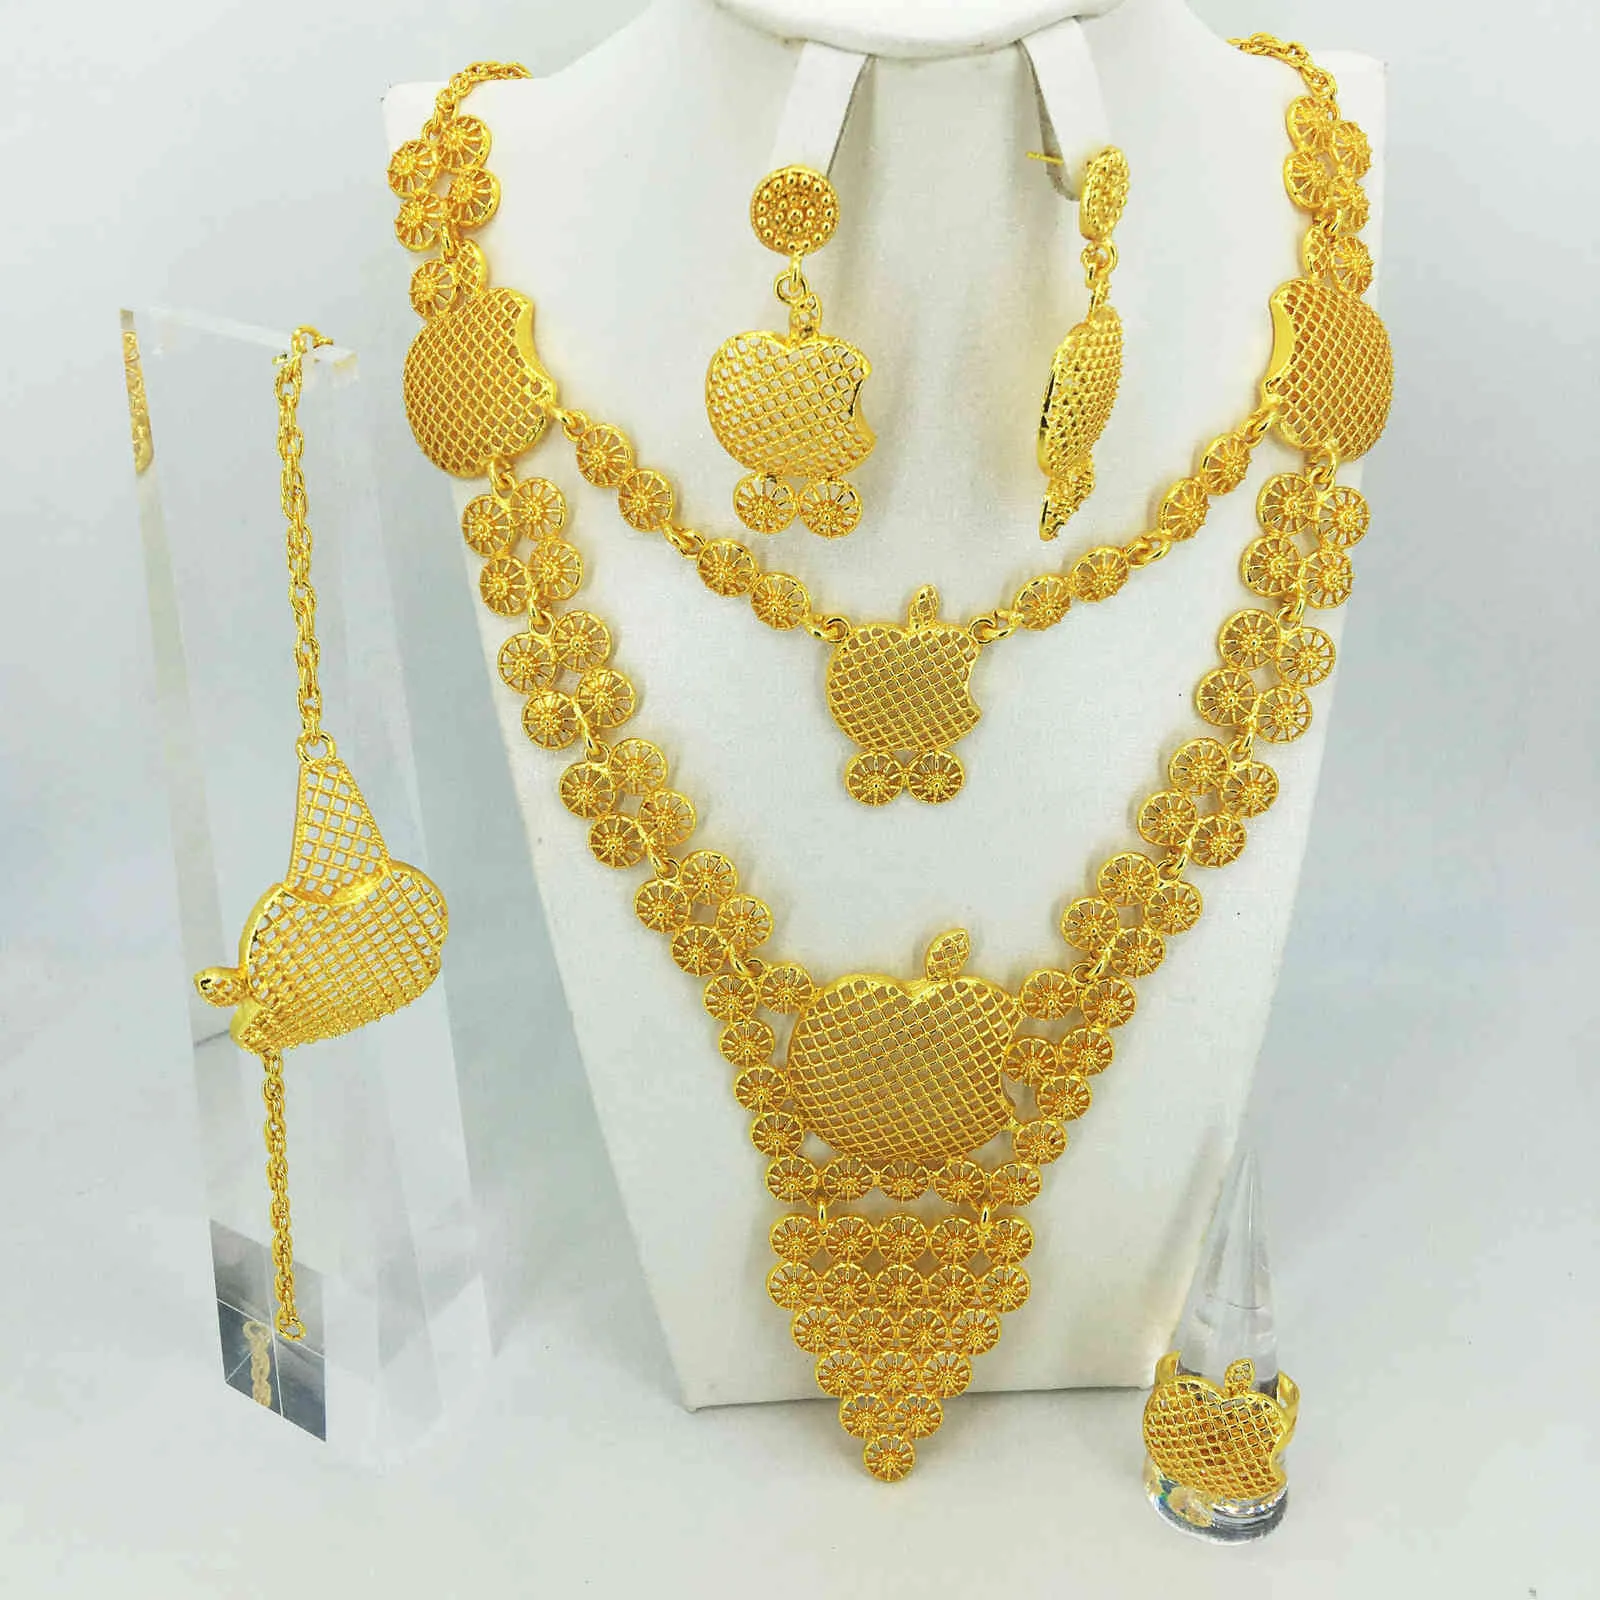 Fashion Wedding Bridal Crystal Jewelry Sets African Beads Dubai Gold Color Statement Jewellery Costume 2110153741469